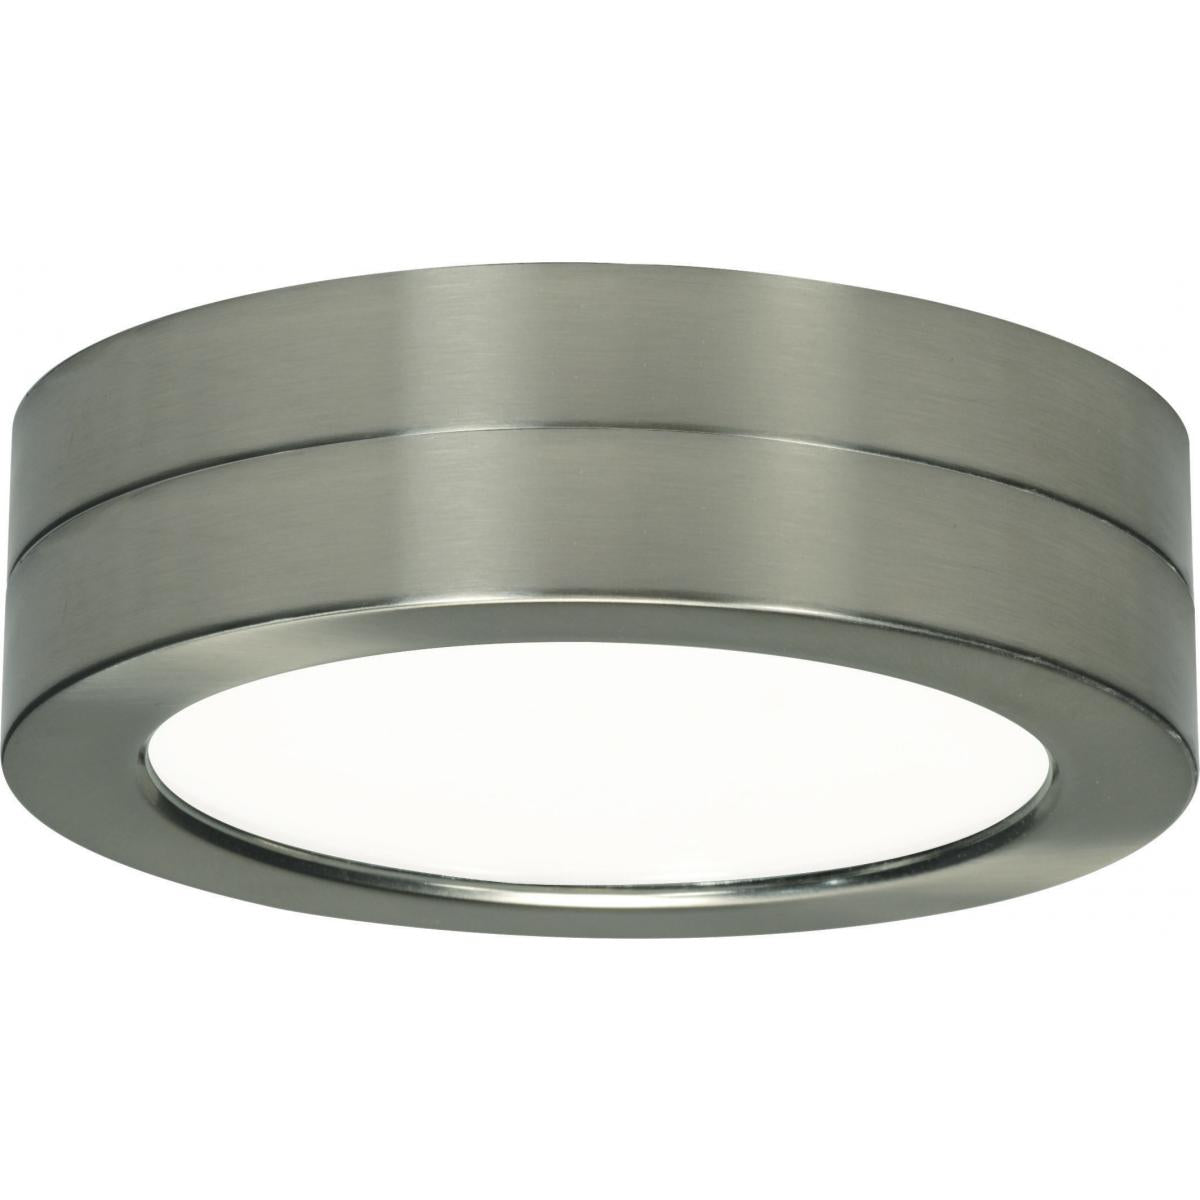 Satco S29654 Battery Backup Module Housing Only For Flush Mount LED Fixture 7" Round Brushed Nickel Finish